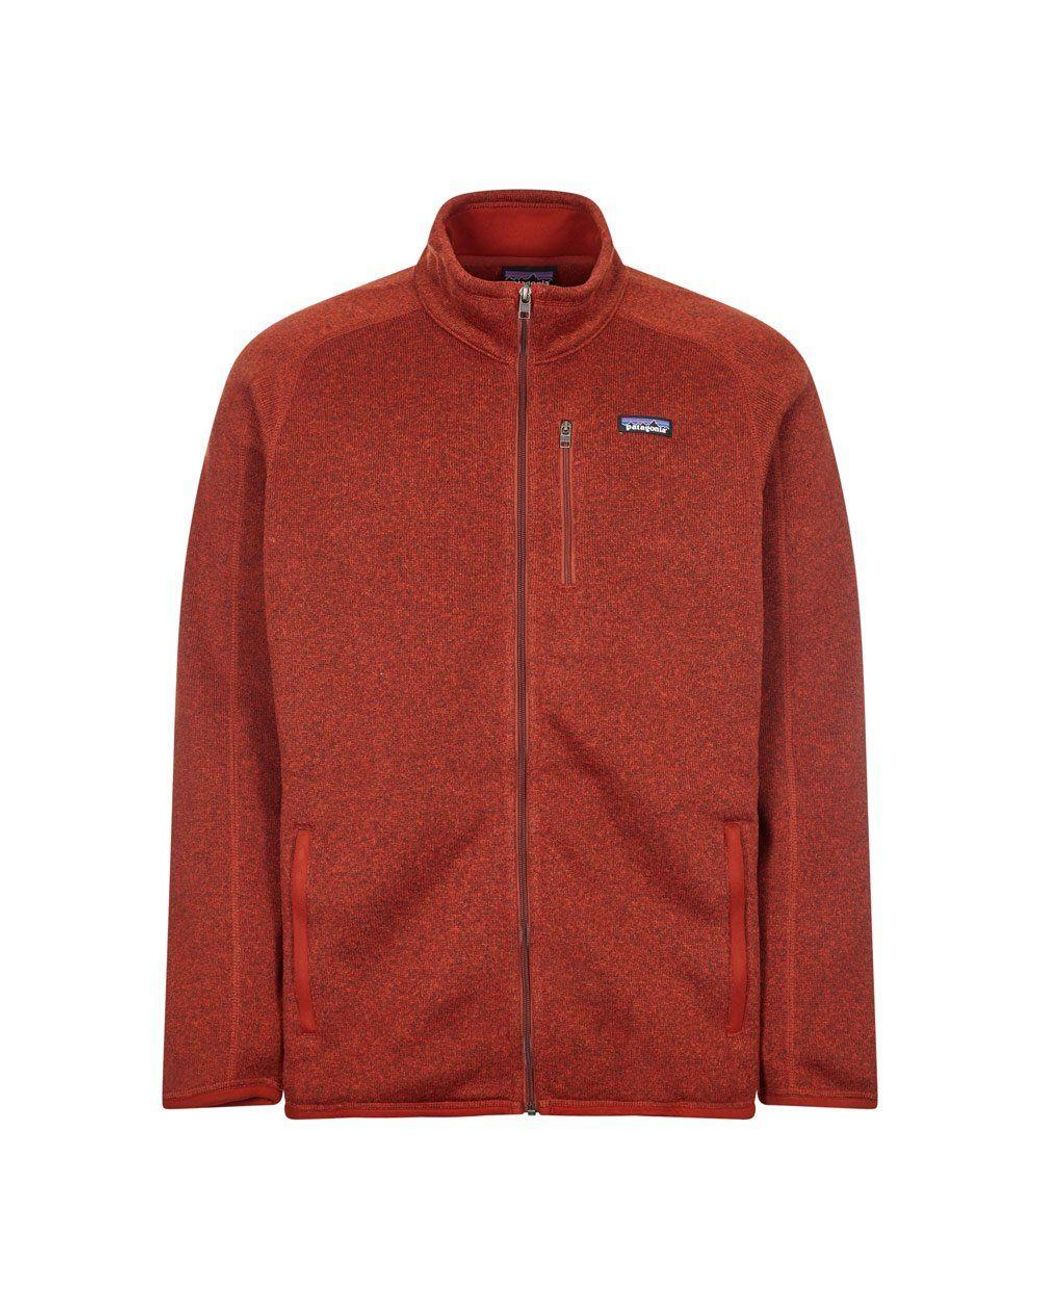 Patagonia Synthetic Better Sweater Jacket - Barn in Red for Men - Lyst